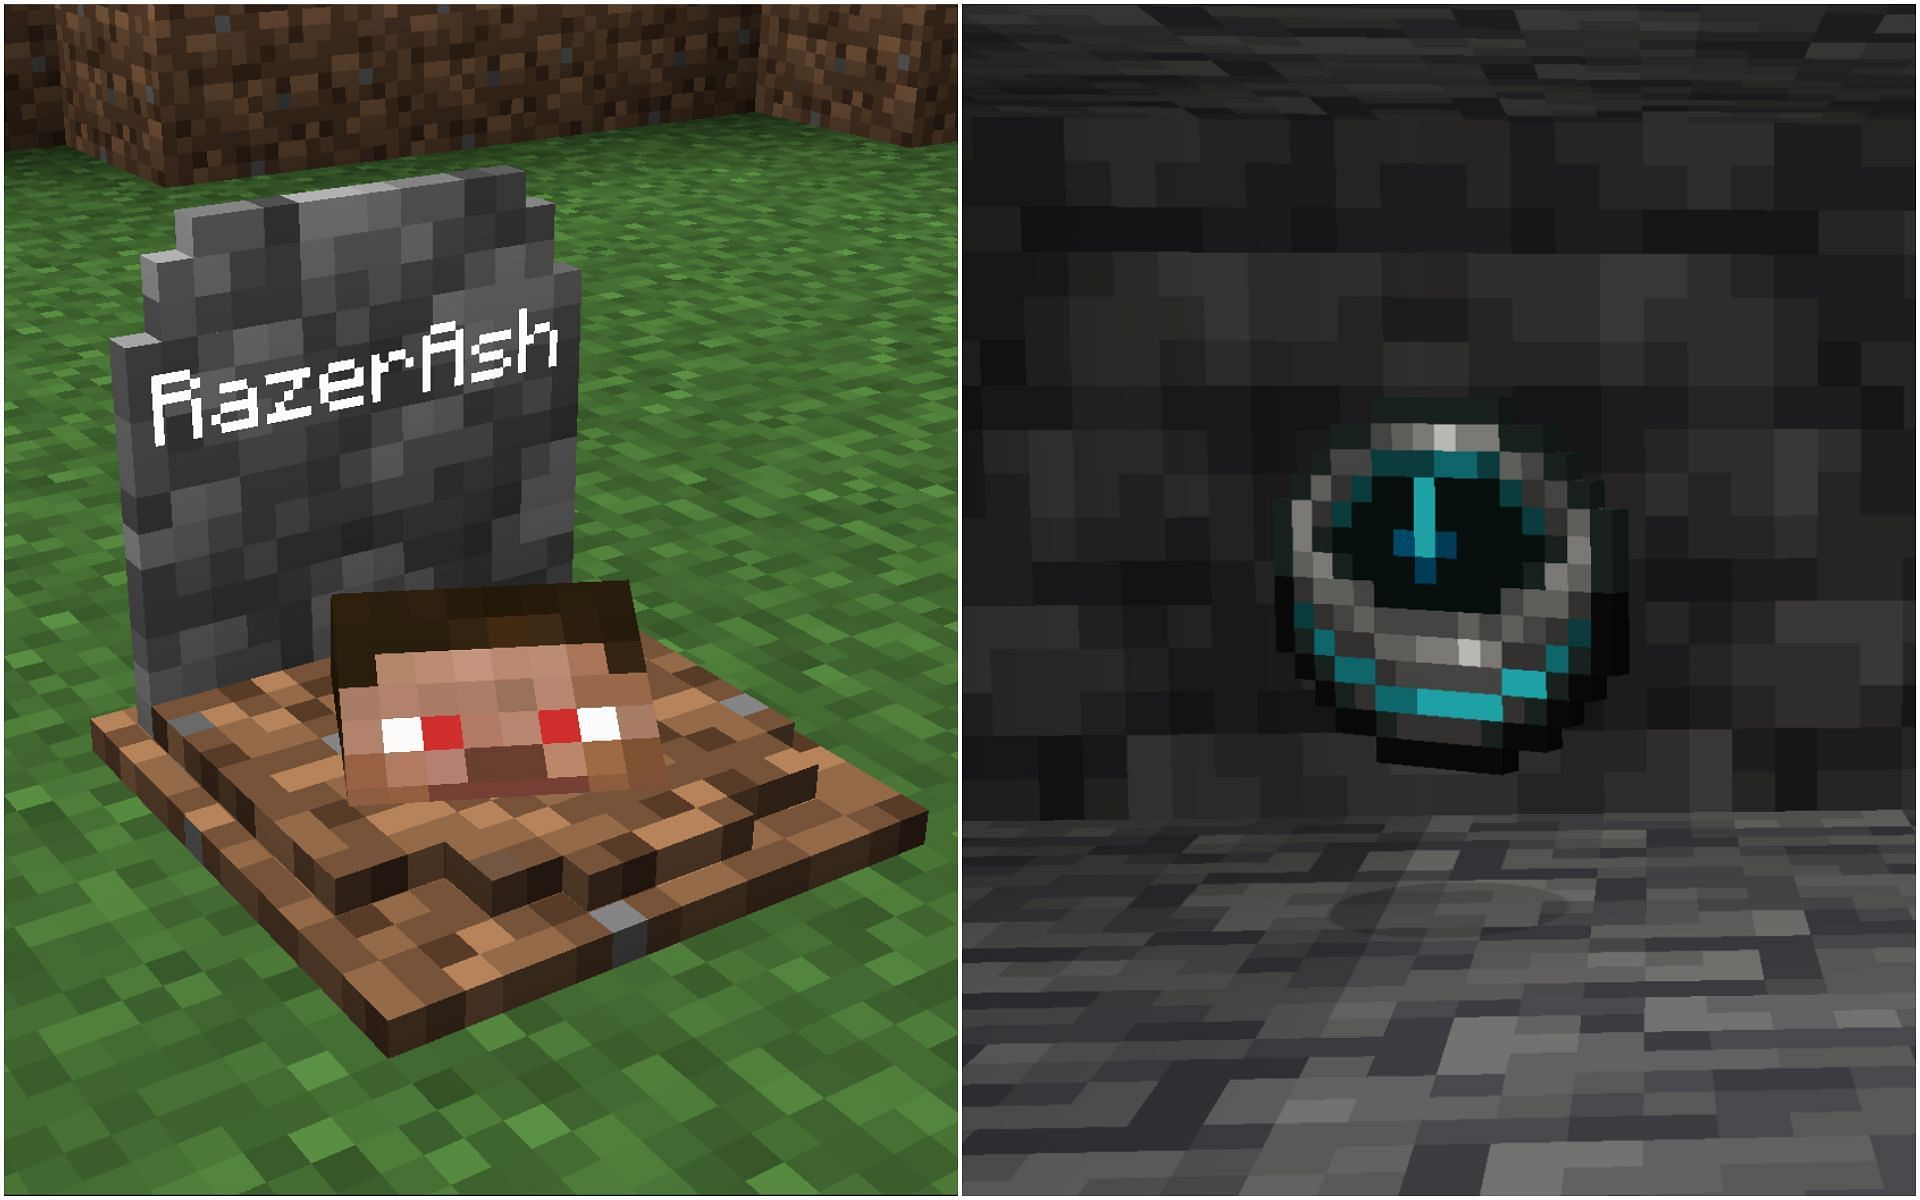 What Does a Recovery Compass Do in 'Minecraft'?